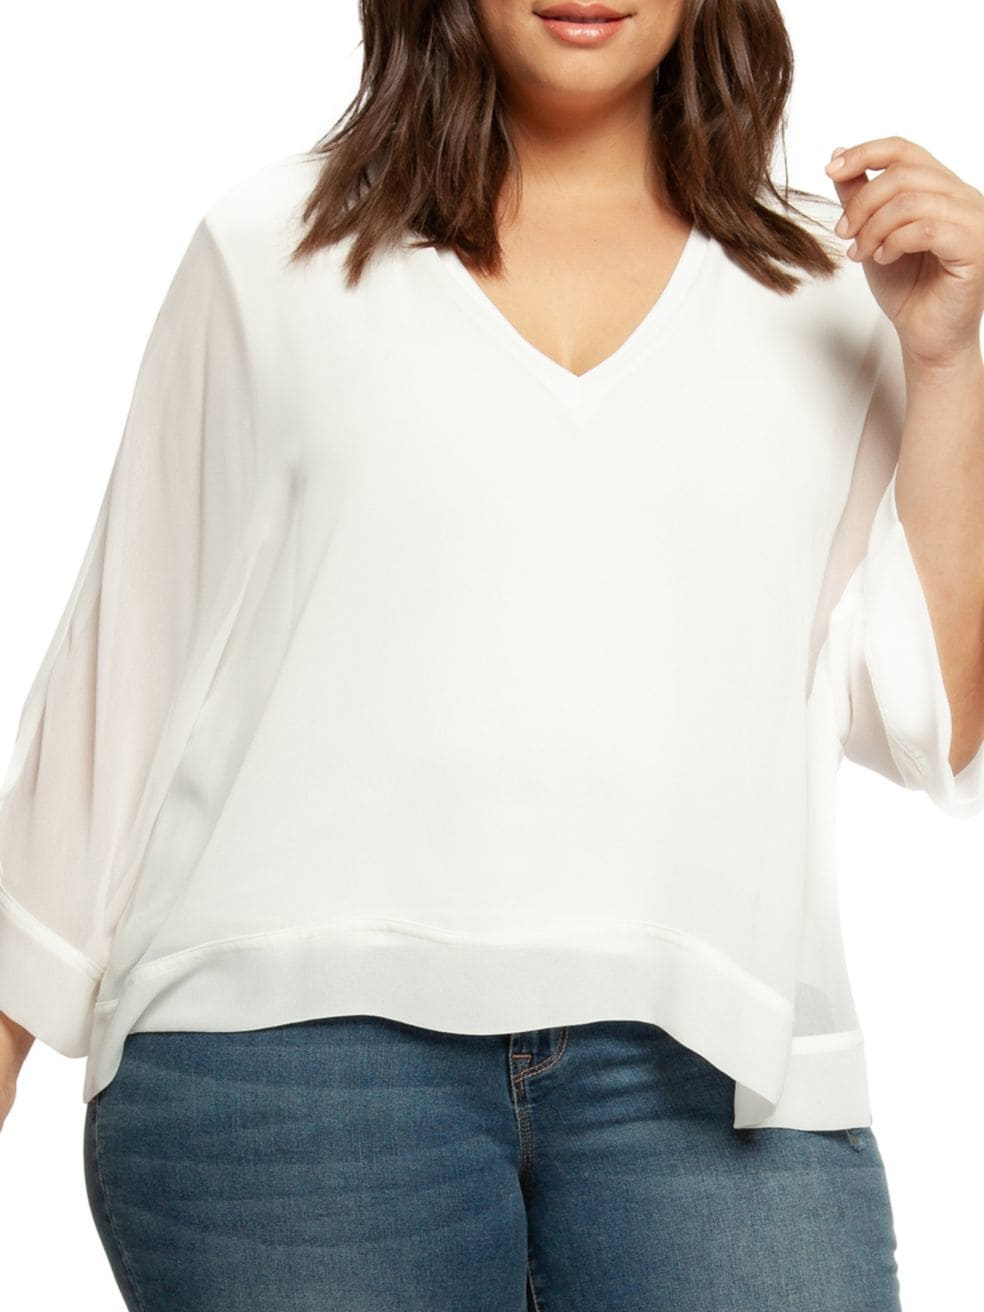 Classic V-neck Blouse - Plus Sizes
Casual top in V-neck design. V-neck Long sleeves Polyester Hand wash Imported SIZE & FIT About 28" from shoulder to hem
Classic V-neck Blouse - Plus Sizes
Casual top in V-neck design. V-neck Long sleeves Polyester Hand wash Imported App. 28" from shoulder to hem.
1373087

$59.99
$59.99
$59.99
blouse, plus skirt, pullover, top, v-neck blouse, v-neck top
Top
Dex Plus



Size: X-Large, 1Xlarge, 2Xlarge, 3Xlarge


Le' Diva Boutique Store